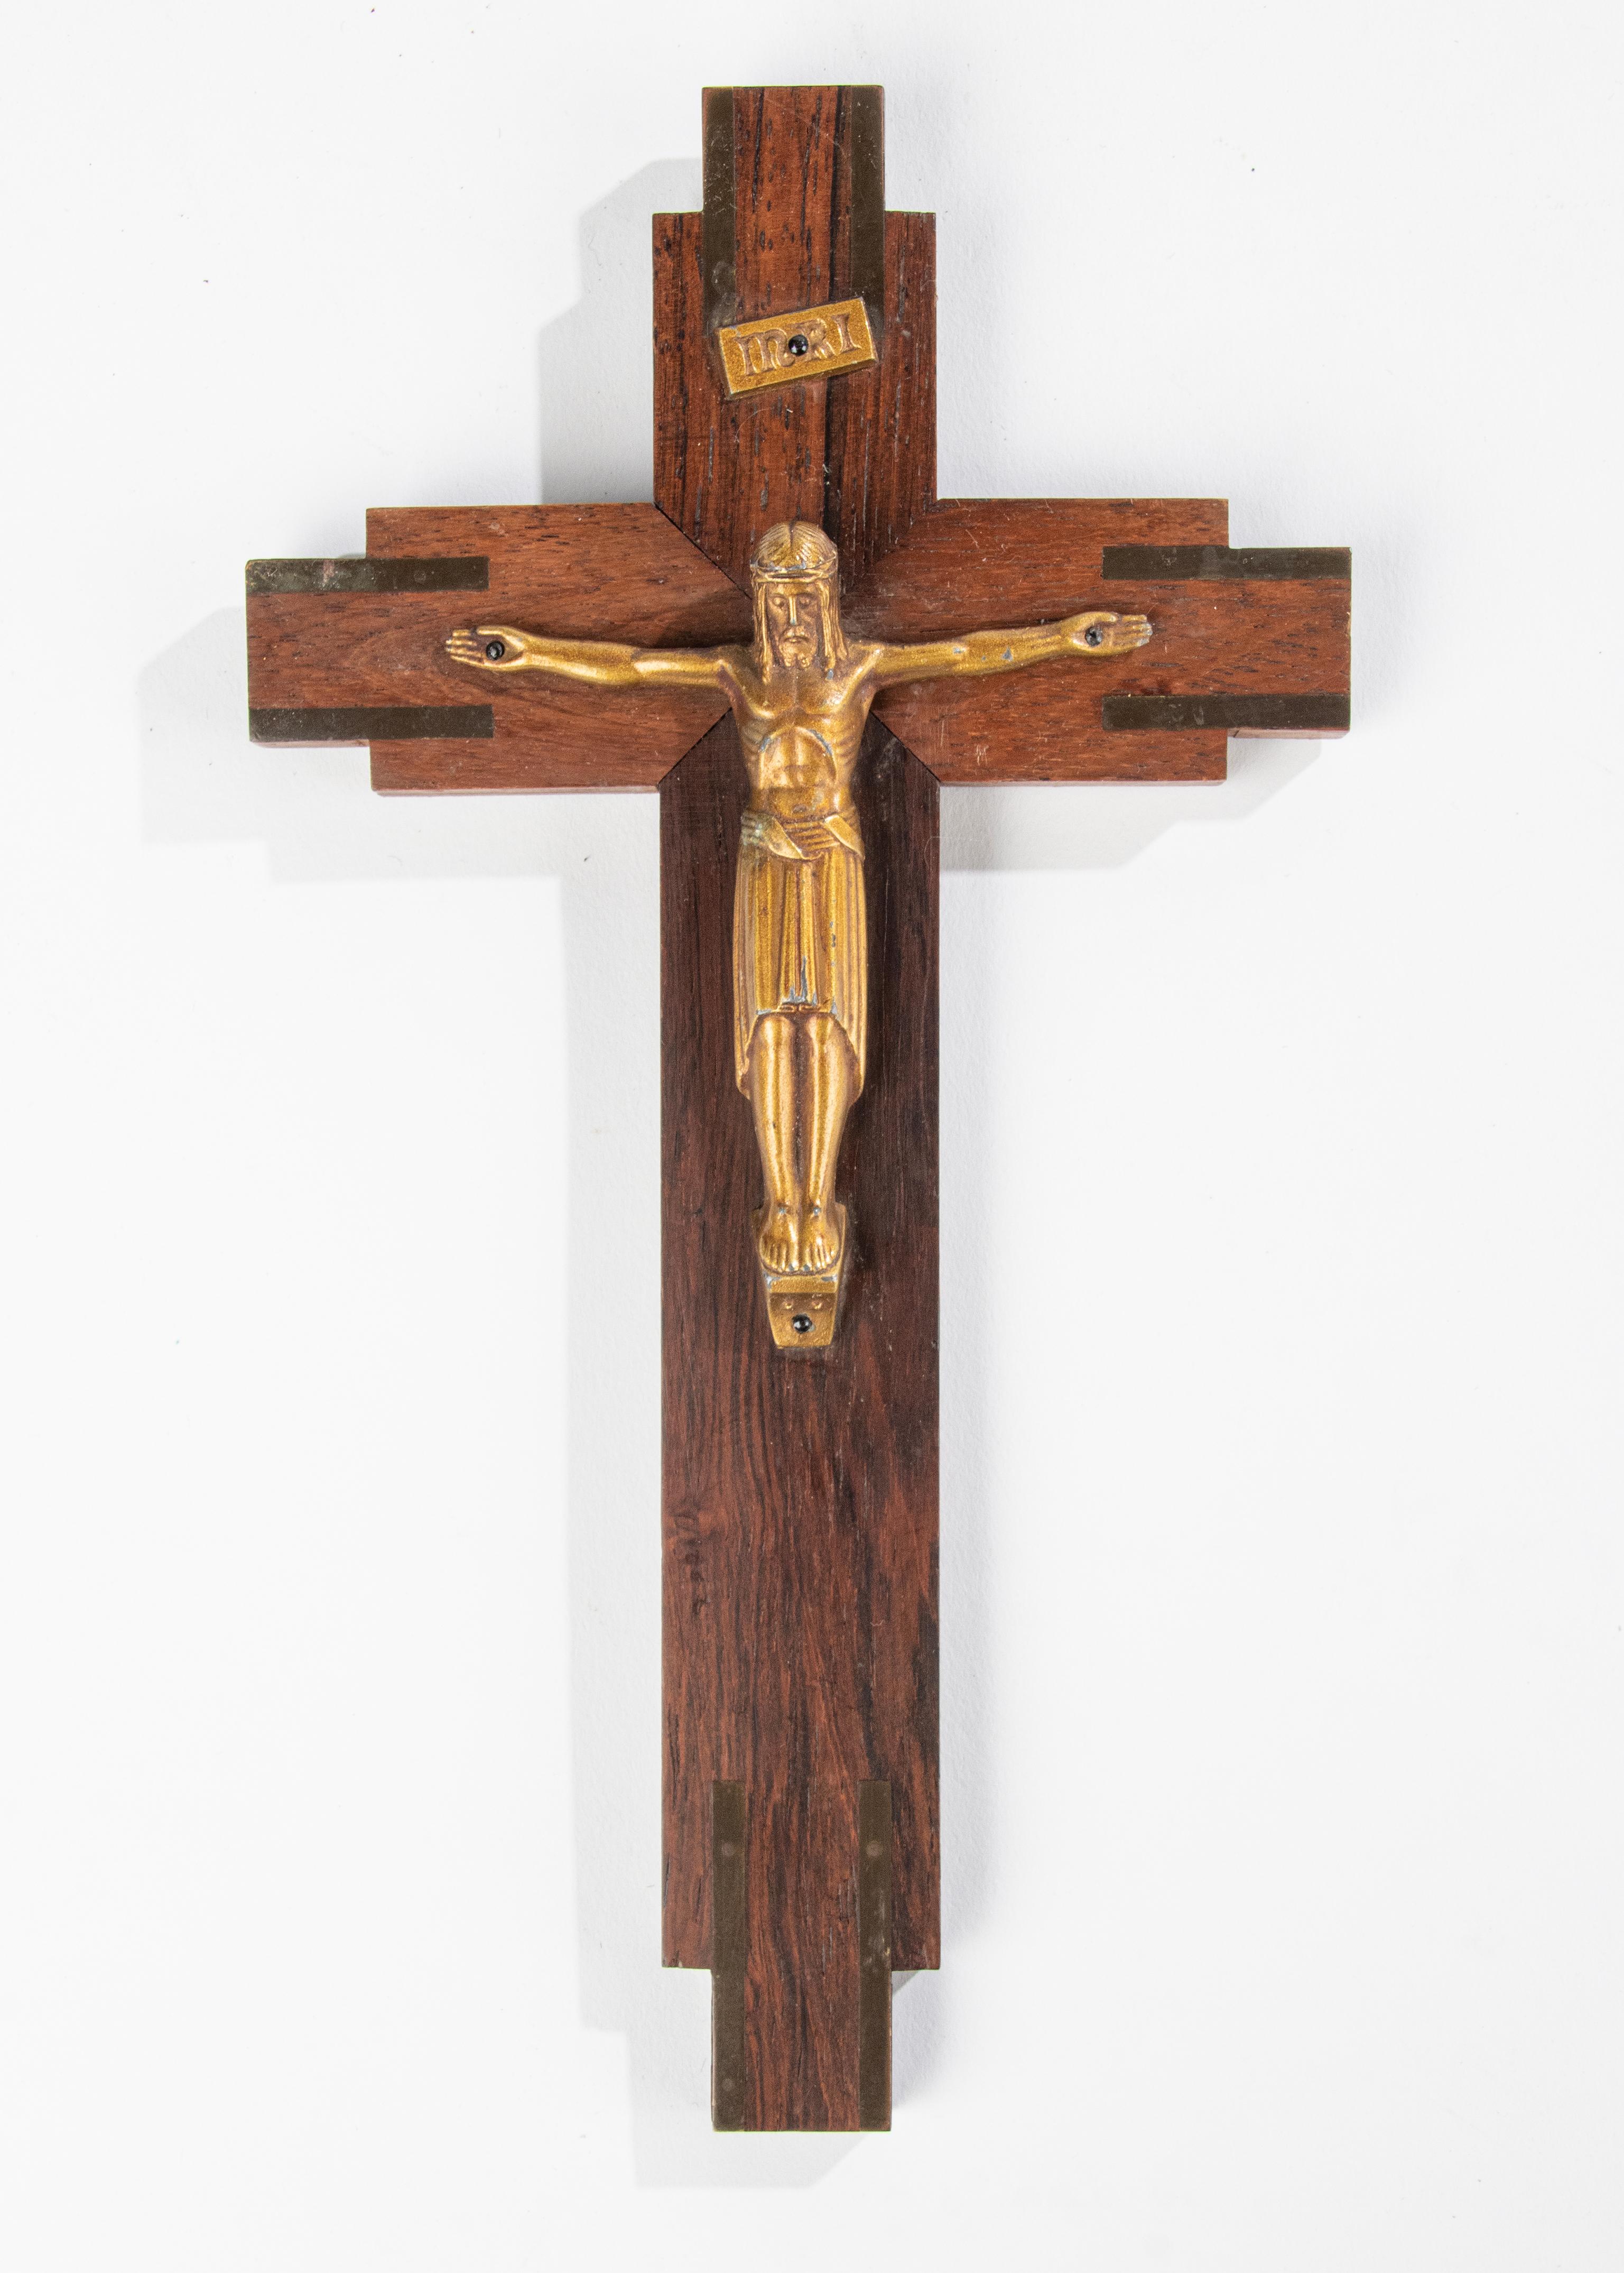 An Art Deco period Corpus Christi cross. The Jesus figurine is made of gilt spelter. The cross is made of solid rosewood with unpolished brass inlays at the ends. In good condition. 

